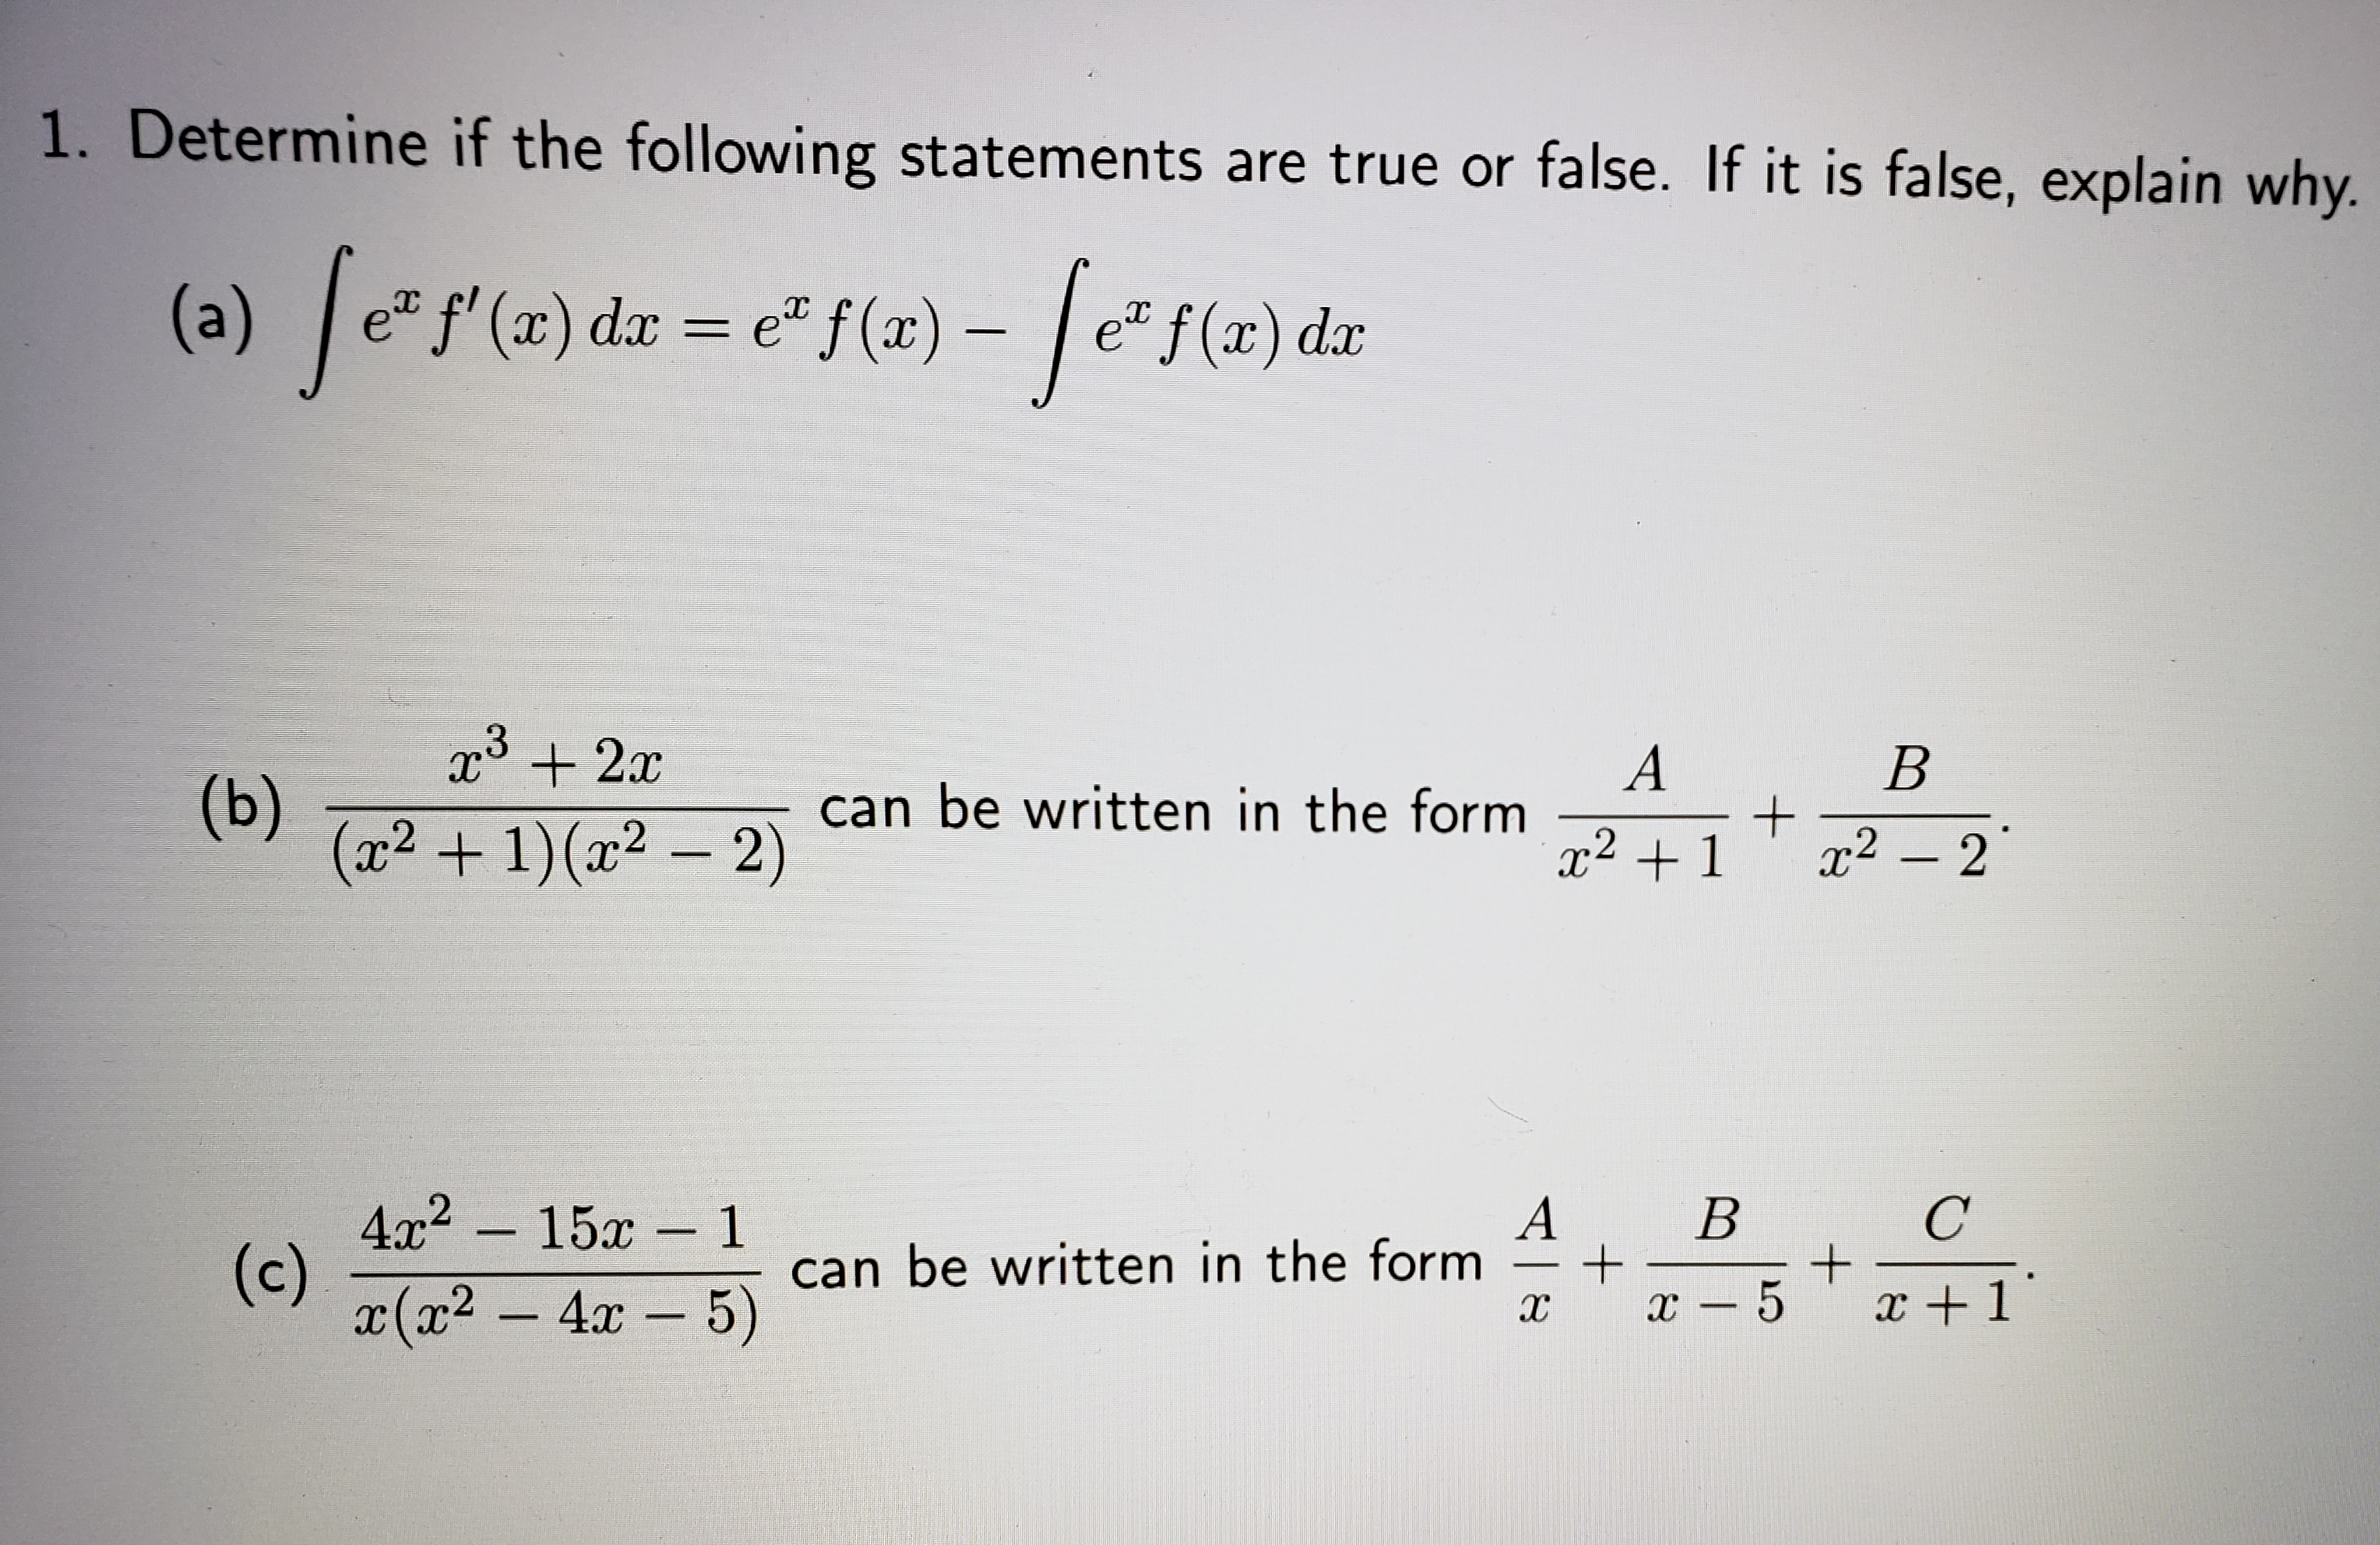 1. Determine if the following statements are true or false. If it is false, explain why.
(a) fesle) da = e"f(e) - fete)dz
+ 2x
(b)
(x2 + 1)(x2 - 2)
can be written in the form
x2 +1
x2 – 2
4x2 - 15x - 1
(c)
x(x2 - 4x 5)
A
can be written in the form
B
x +1
